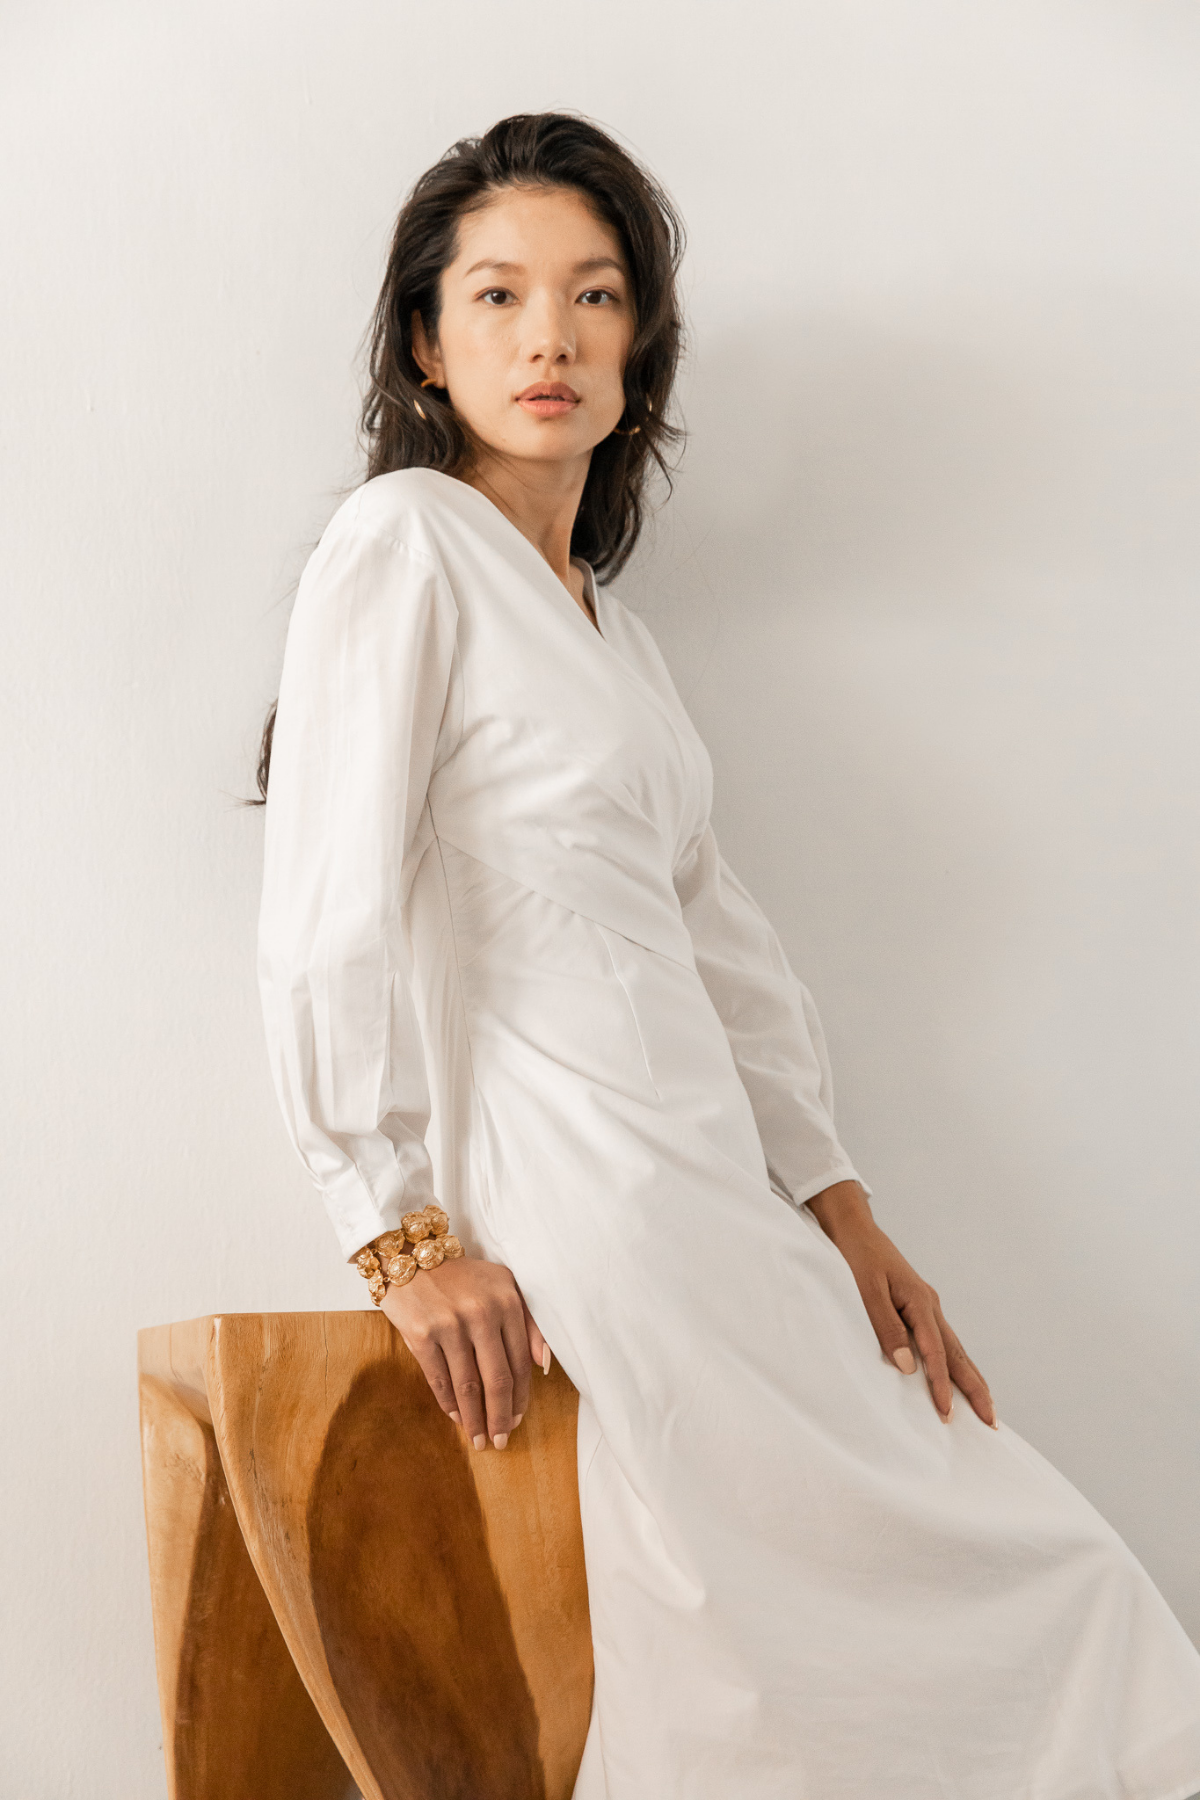 Su By Hand Vanda Dress in White, available on ZERRIN with free Singapore shipping